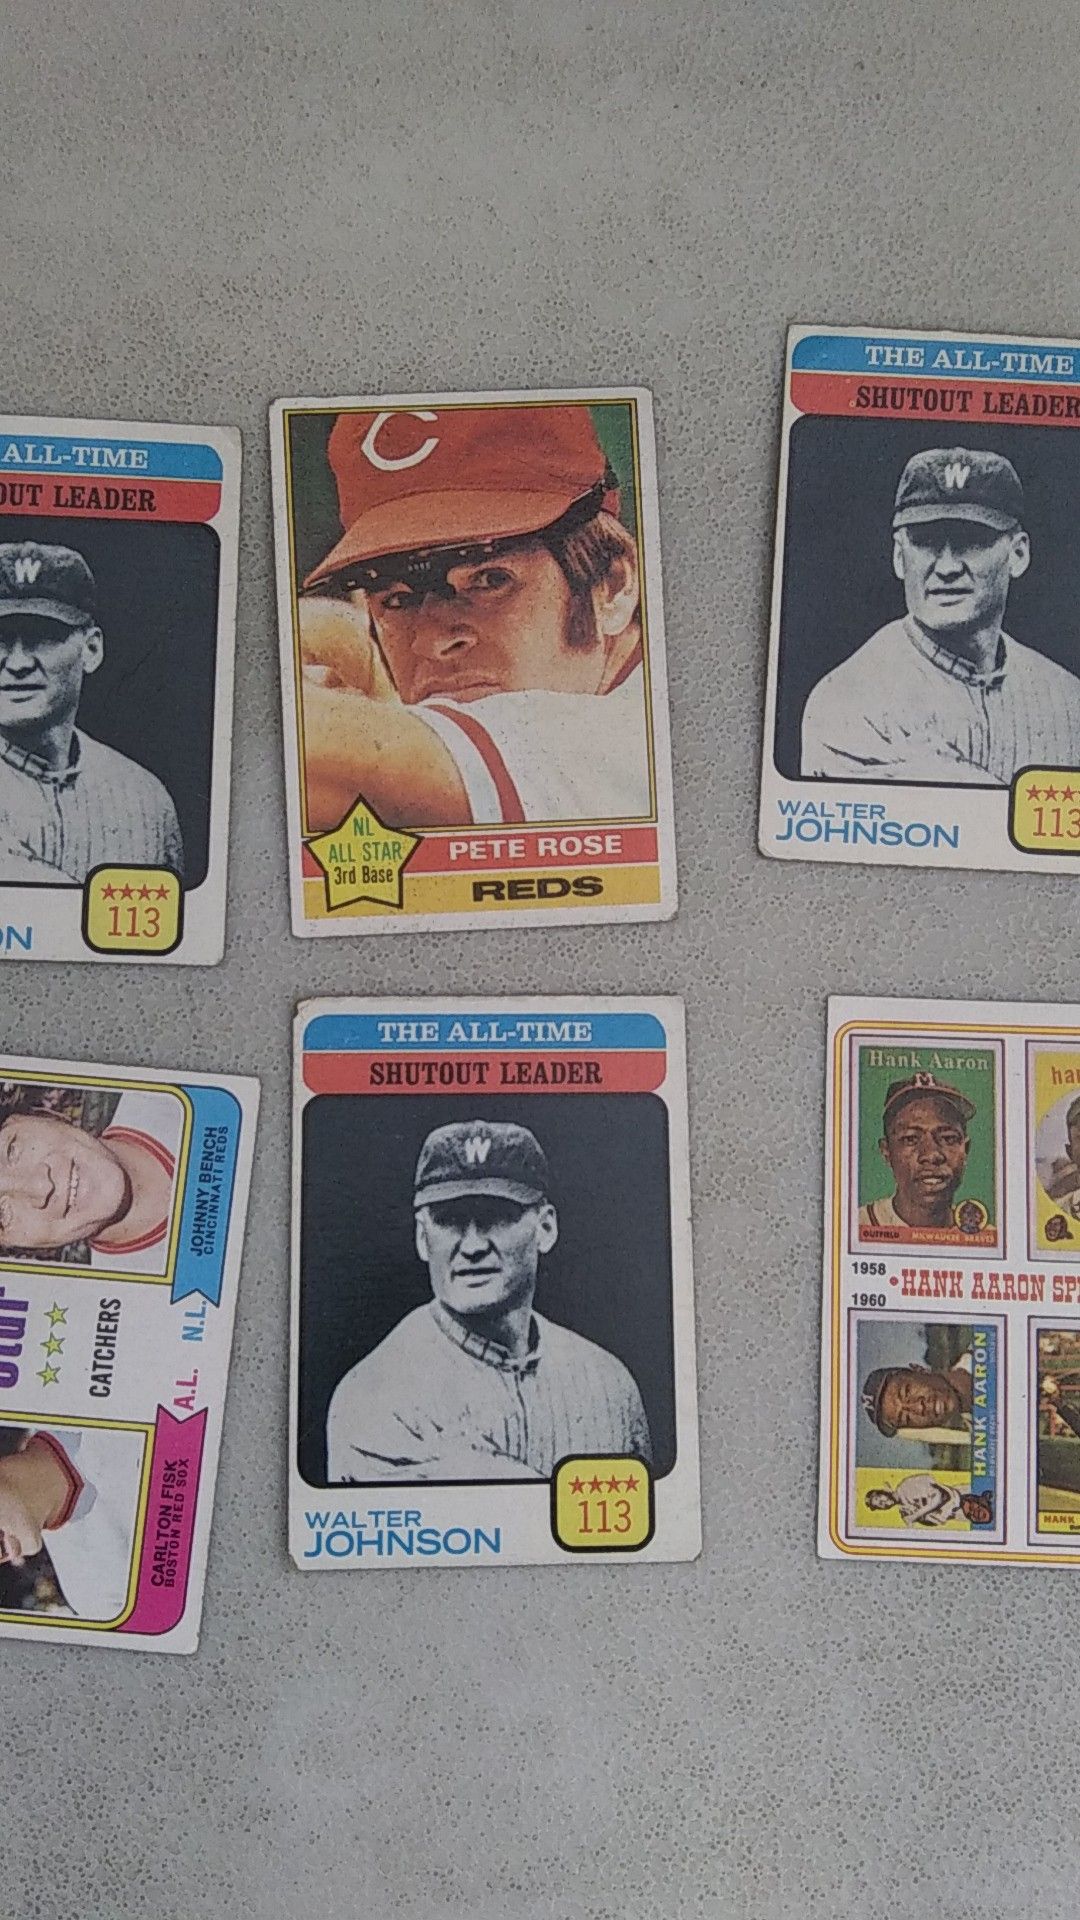 Old baseball cards here